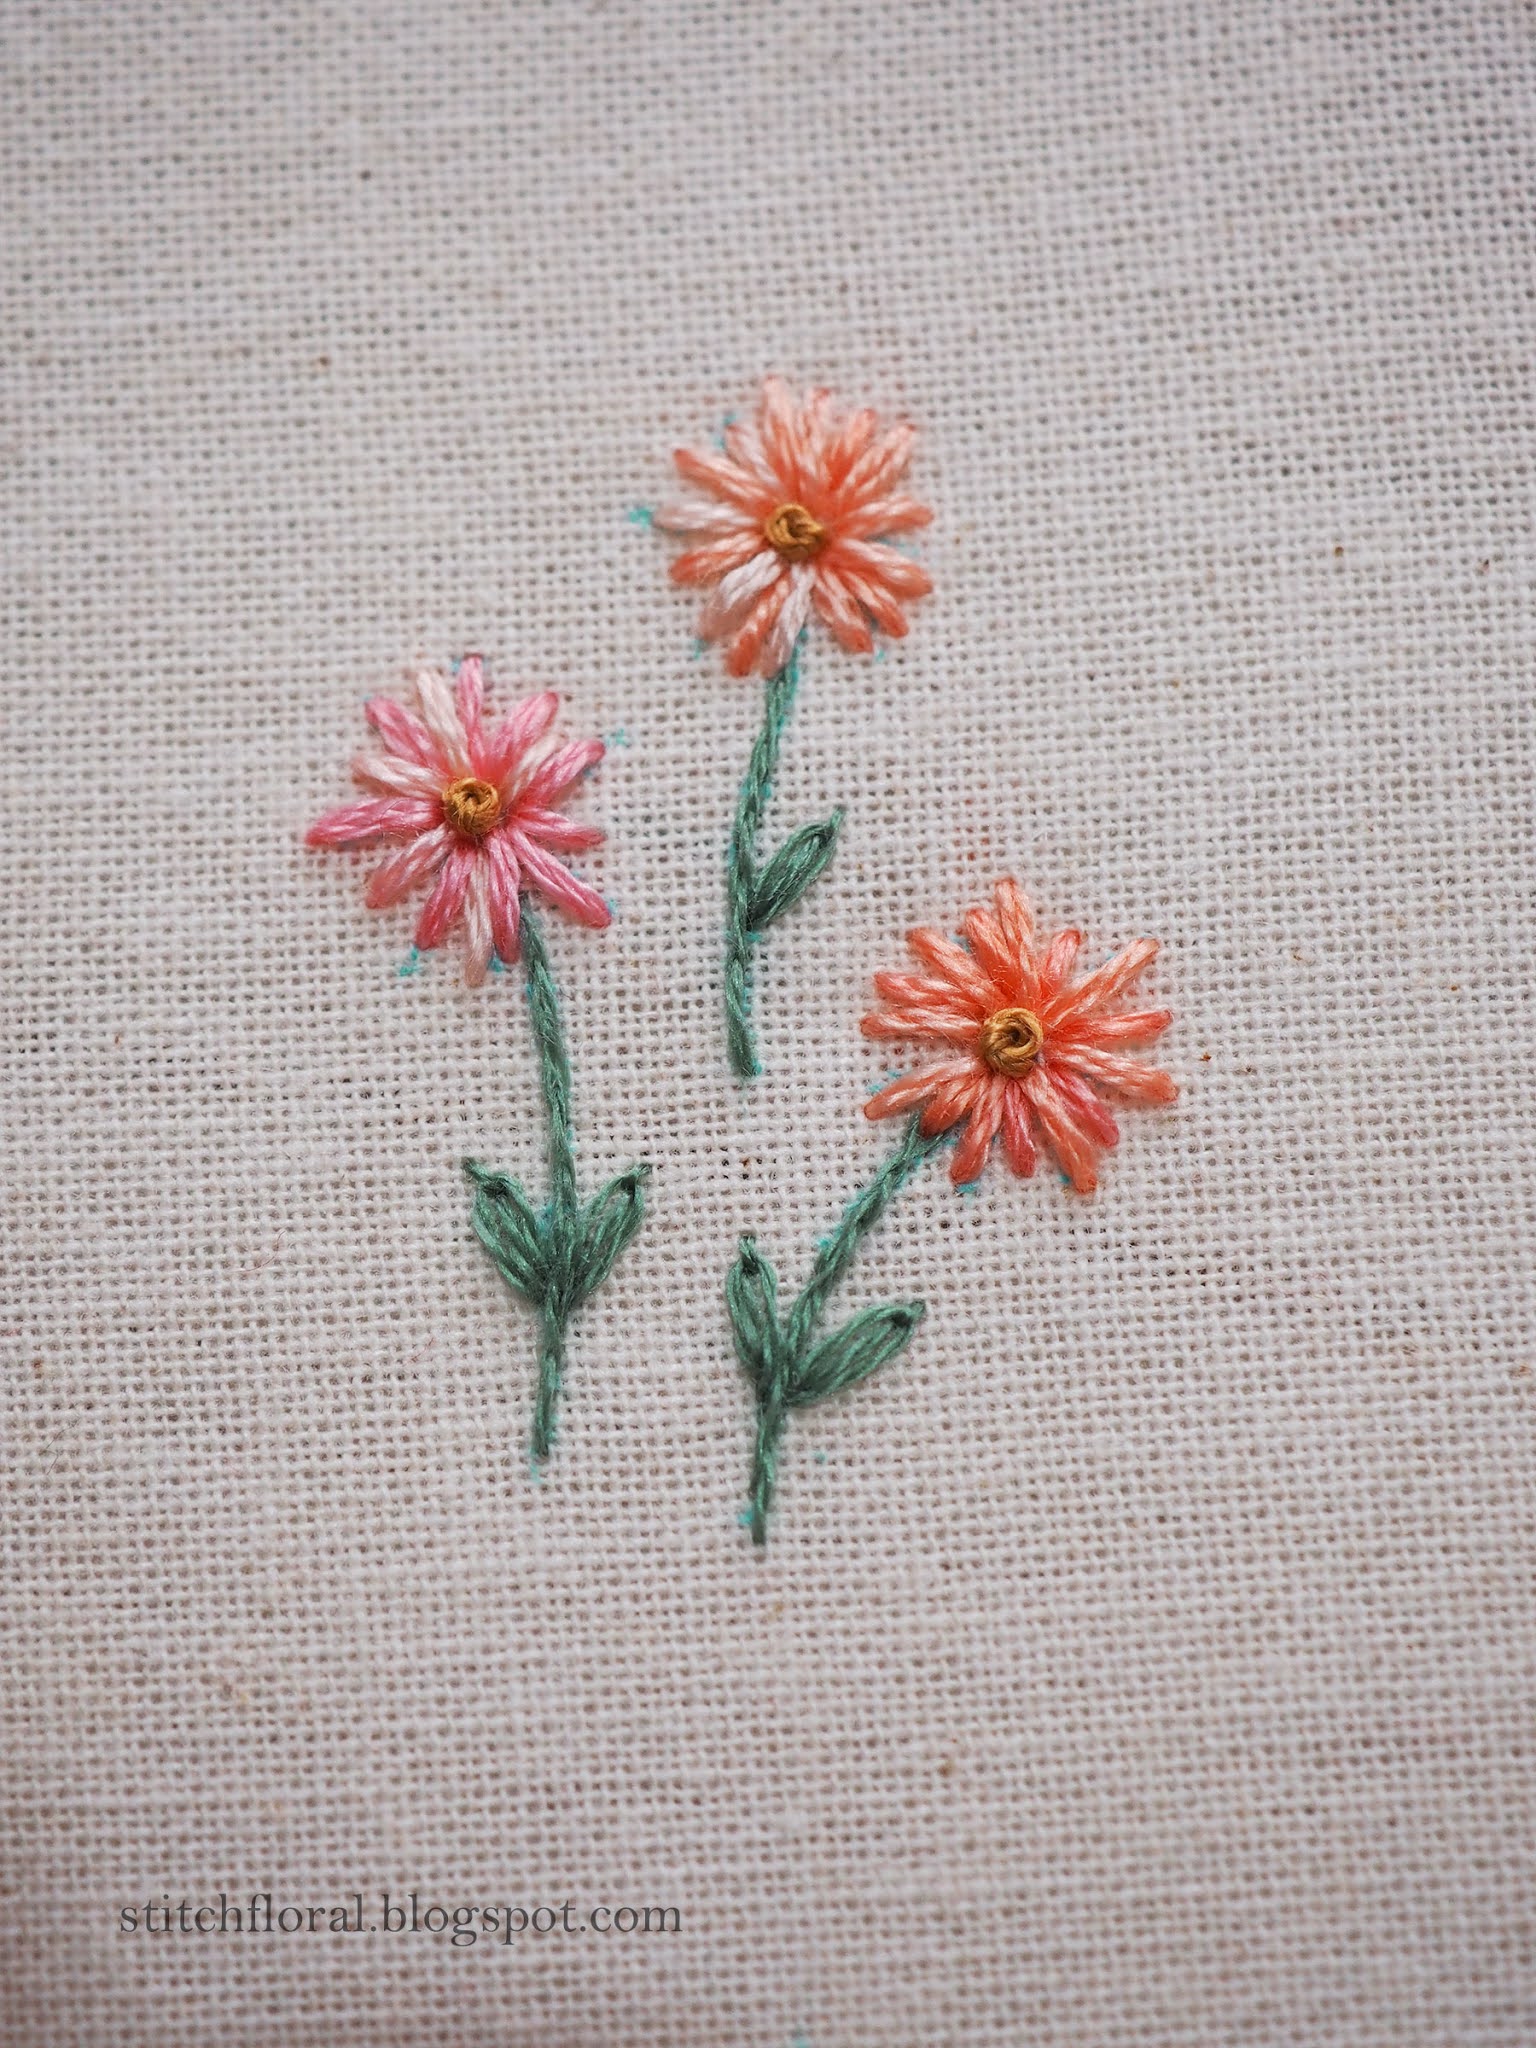 Variegated thread embroidery - SewGuide